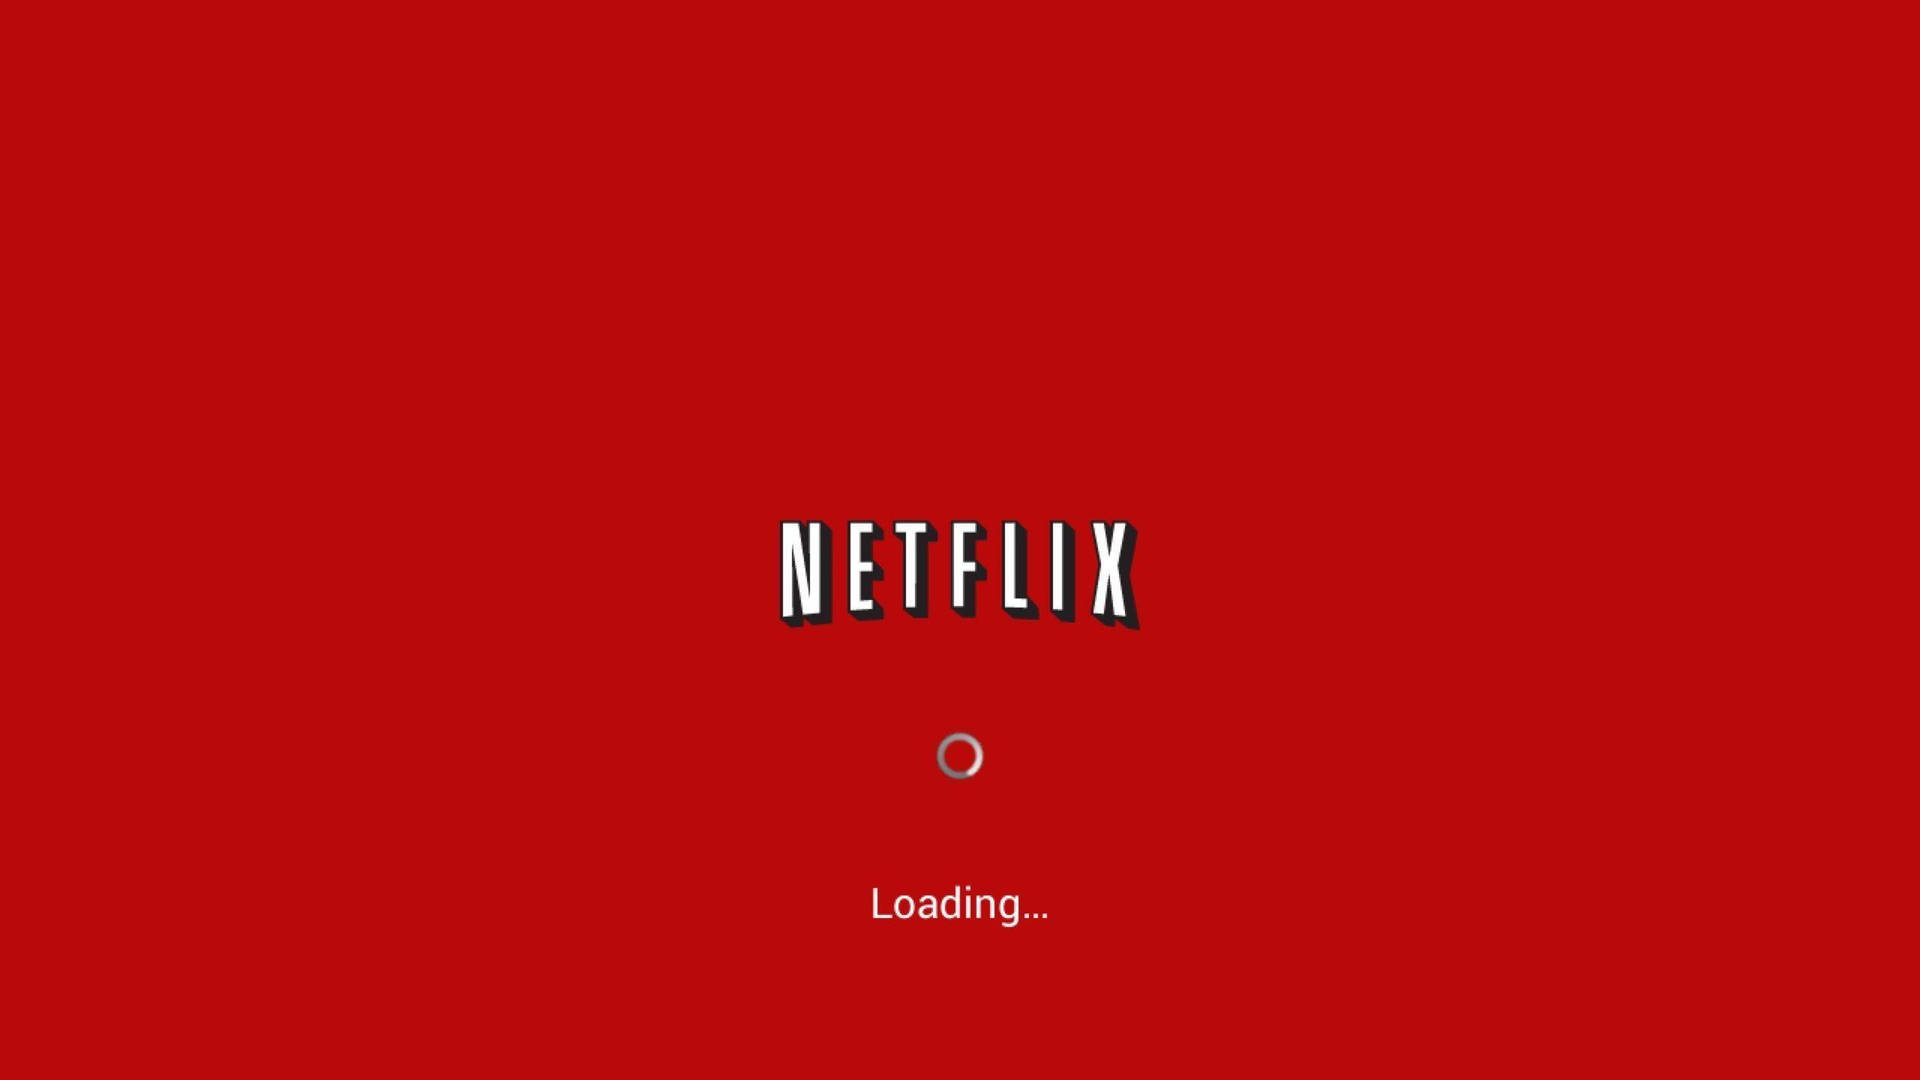 Streaming Unlimited Entertainment On Netflix Wallpaper